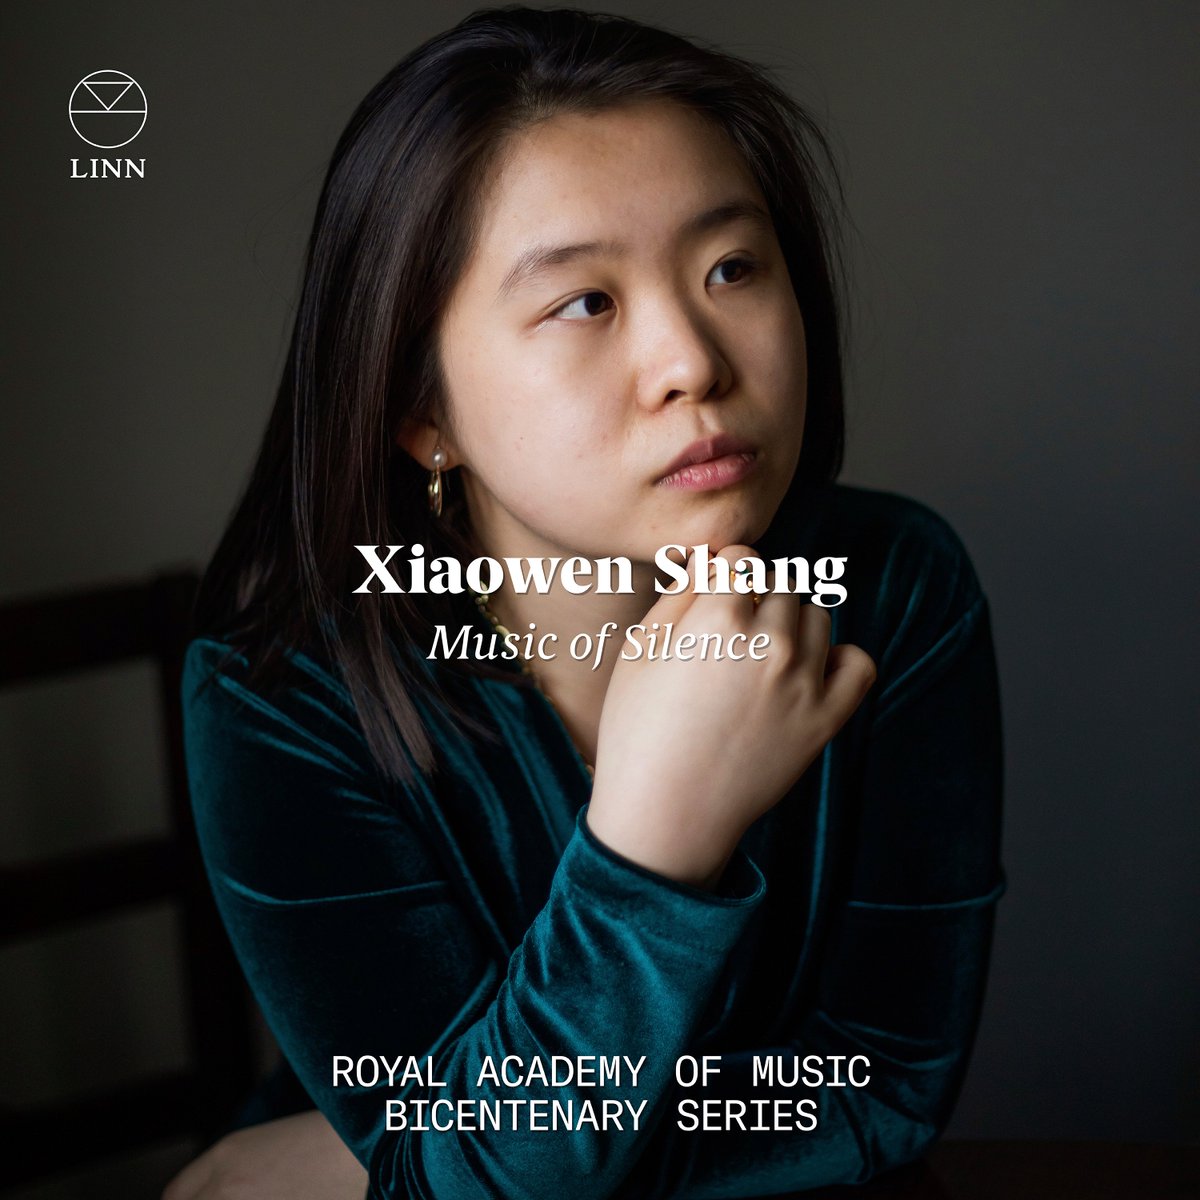 OUT TODAY! Pianist Xiaowen Shang’s debut weaves a gorgeous, thought-provoking tapestry from three centuries of Spanish music. Part of the @RoyalAcadMusic Bicentenary Series, Music of Silence pairs works by Soler & de Cabézon with Mompou’s Música callada. lnk.to/MusicOfSilence…